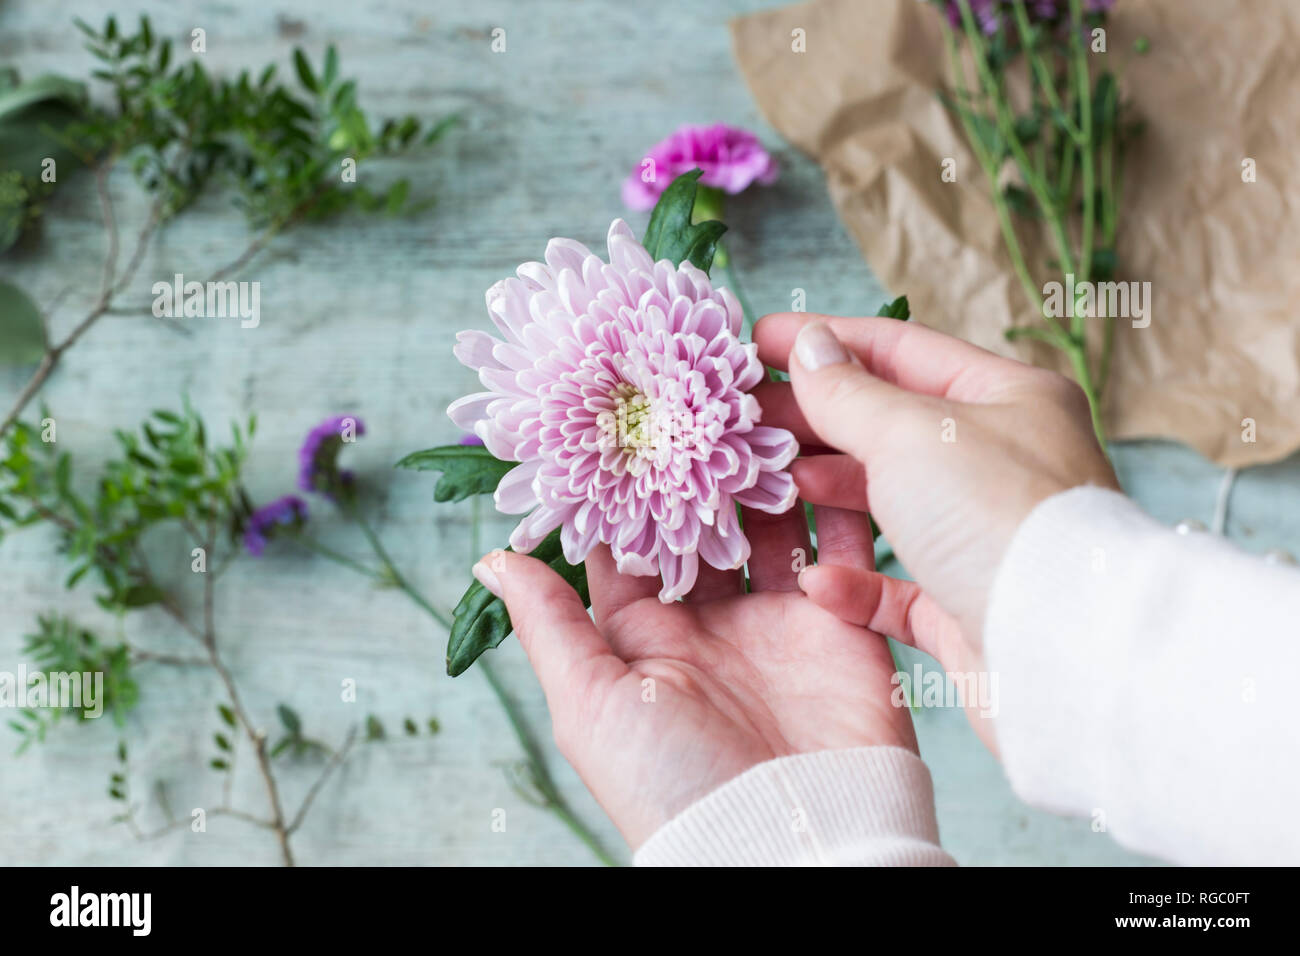 Woman's hands holding pink flower head Stock Photo